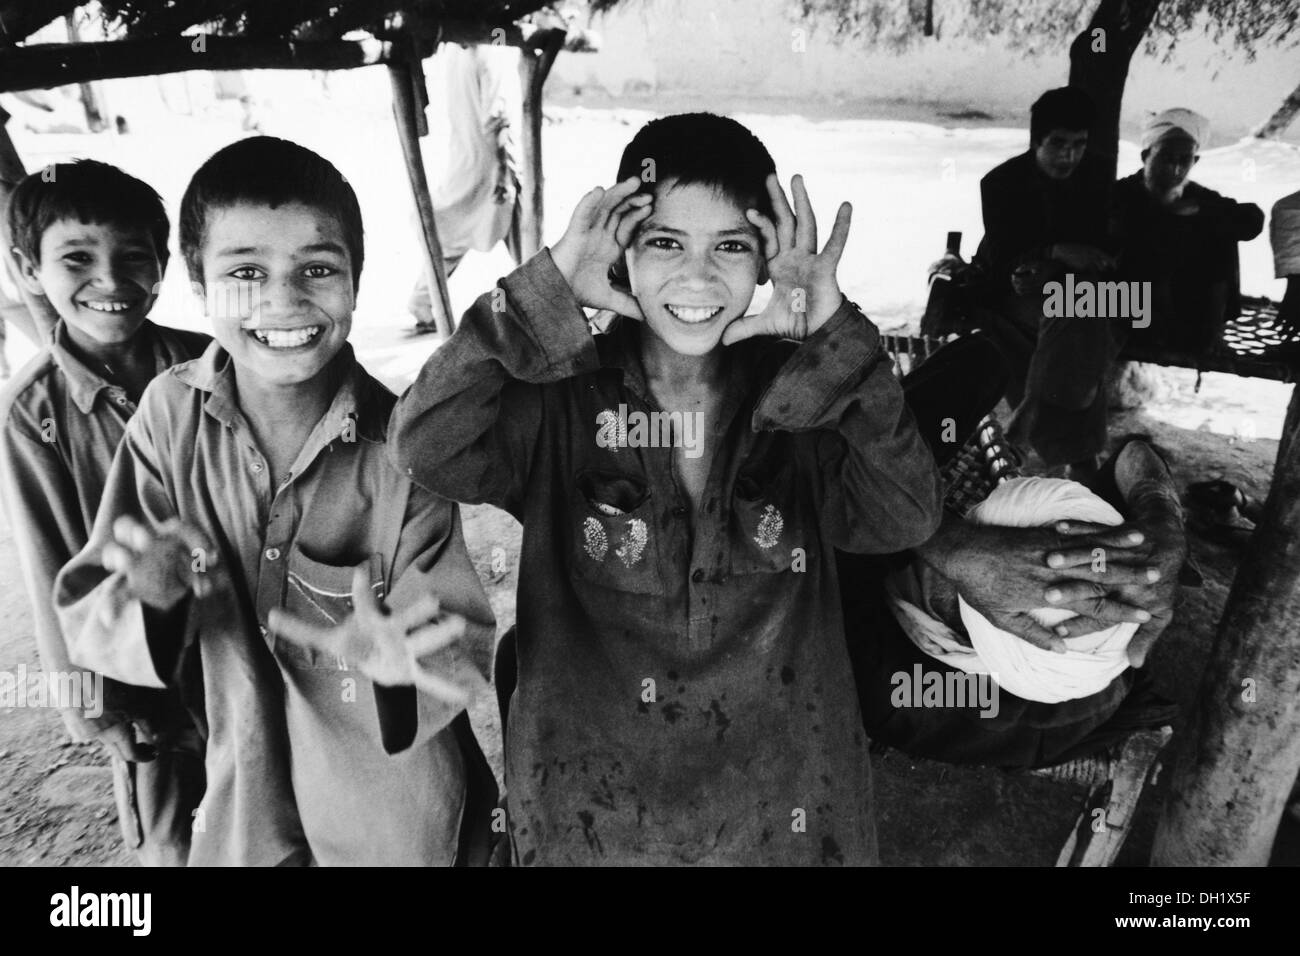 Children play in the Jalalabad area of Afghanistan . Pix by Wayne Perry - Stock Photo